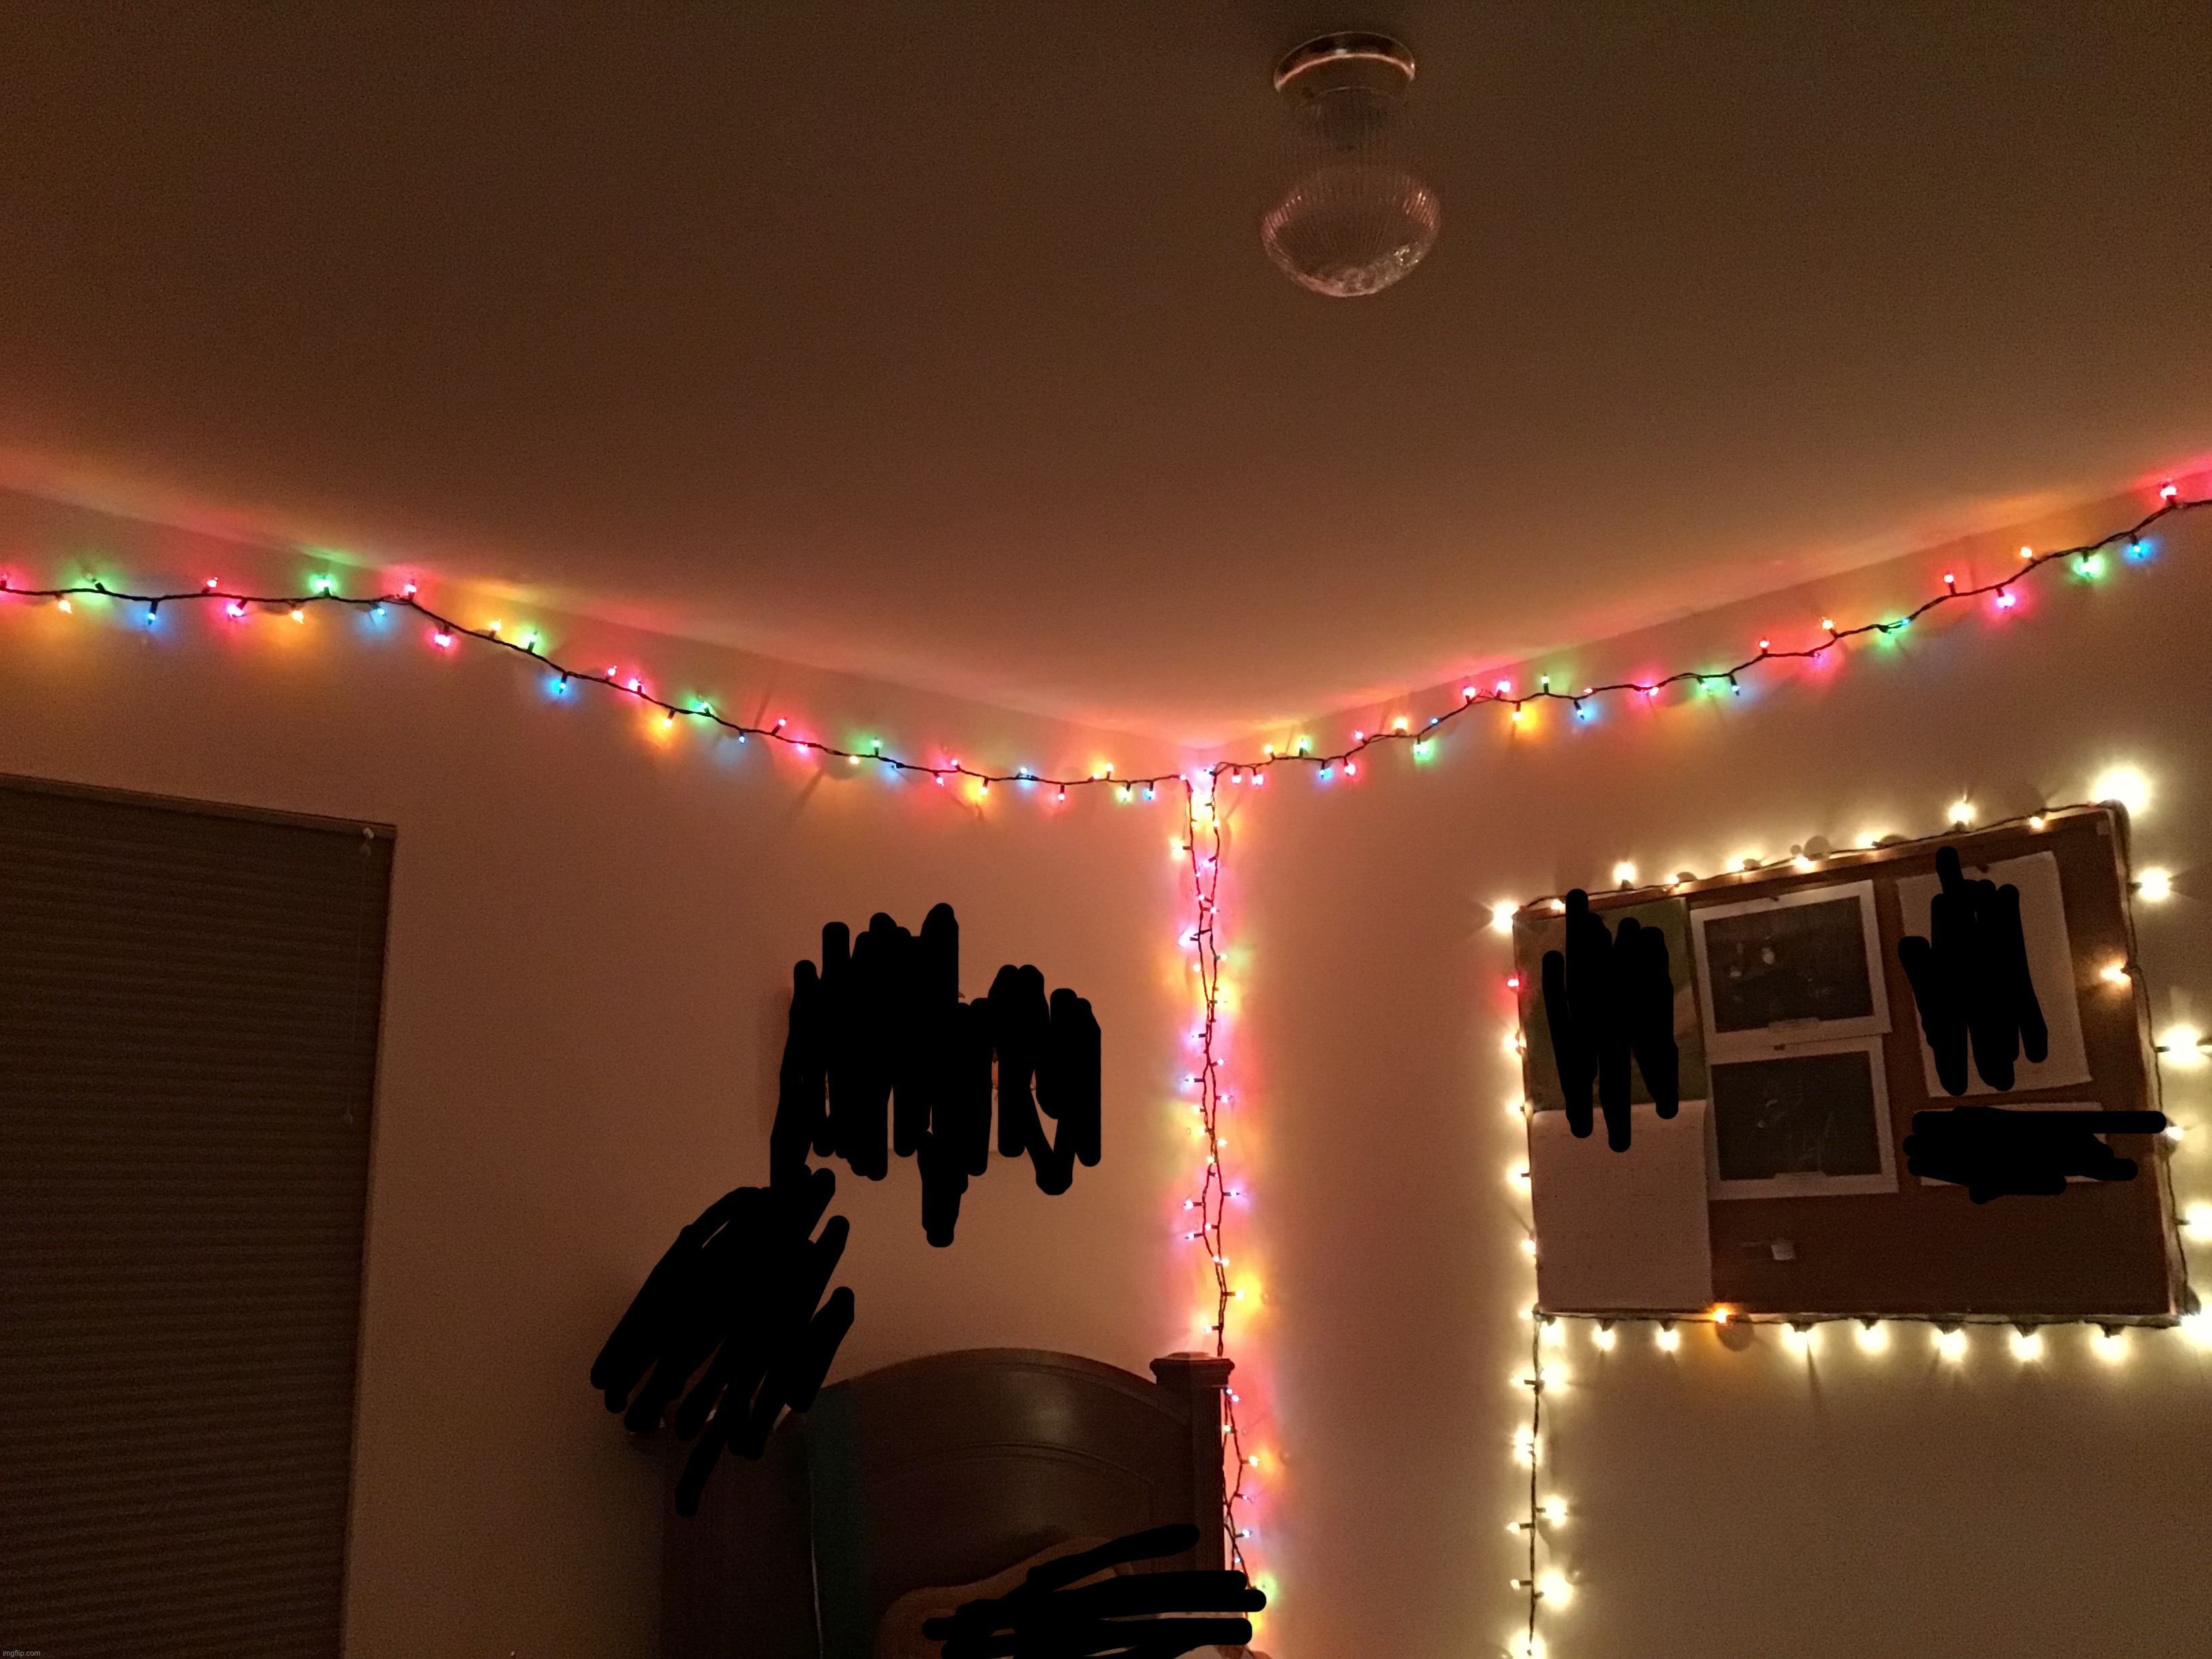 Offline because I was putting up a ton of lights in my room :). They look amazing | image tagged in memes,amazing,lights,mini lights | made w/ Imgflip meme maker